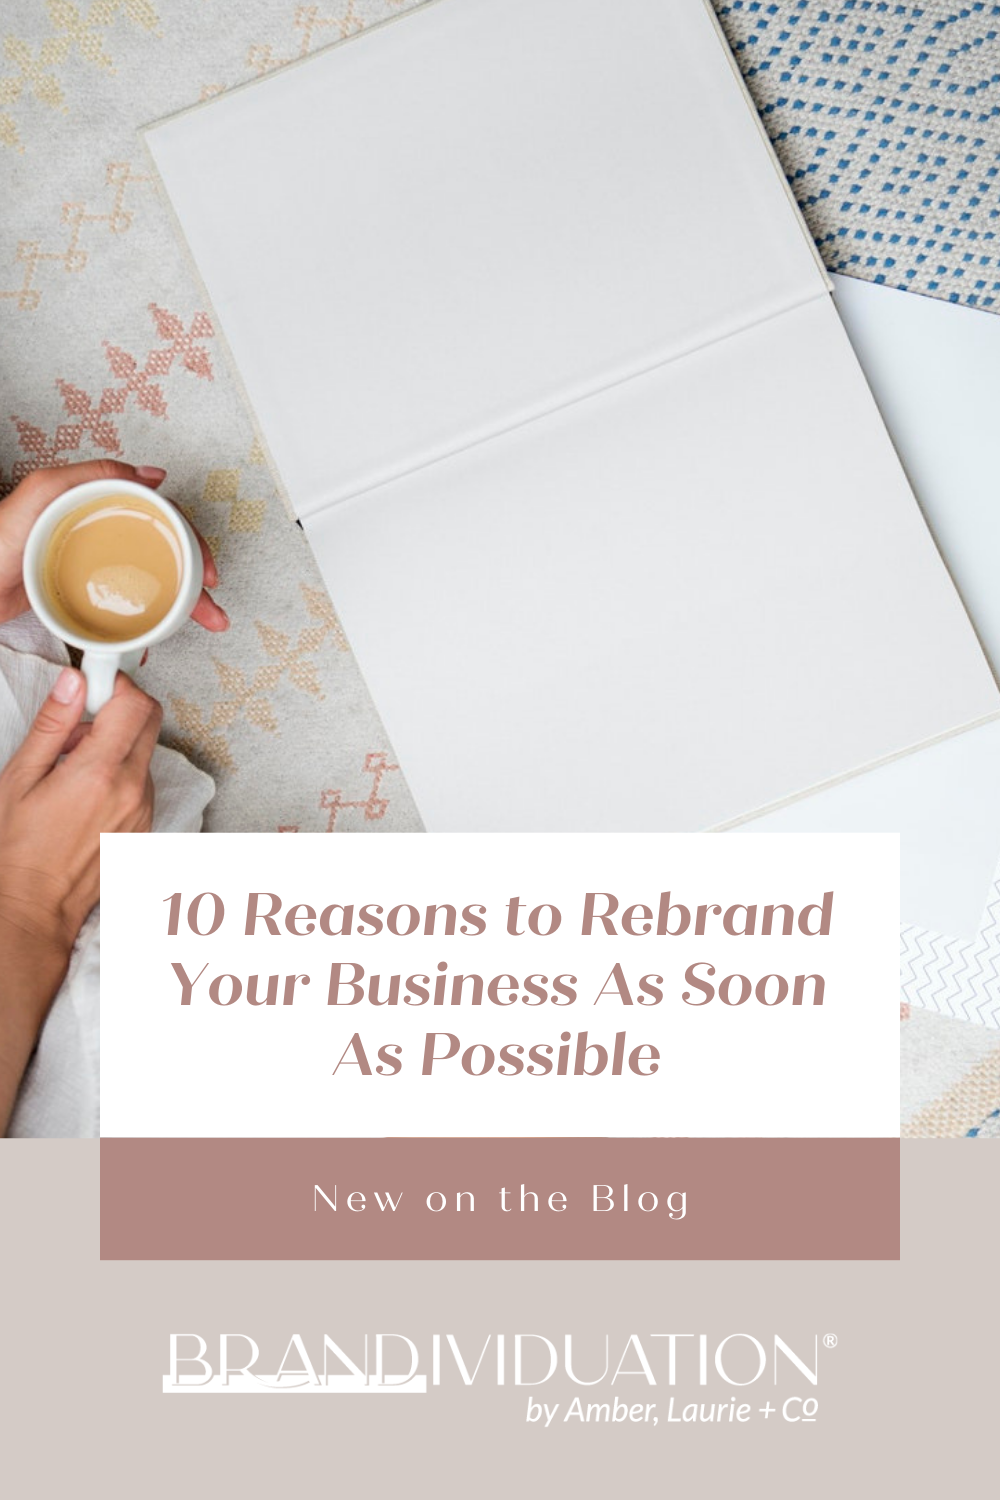 10 Reasons to Rebrand Your Business As Soon As Possible